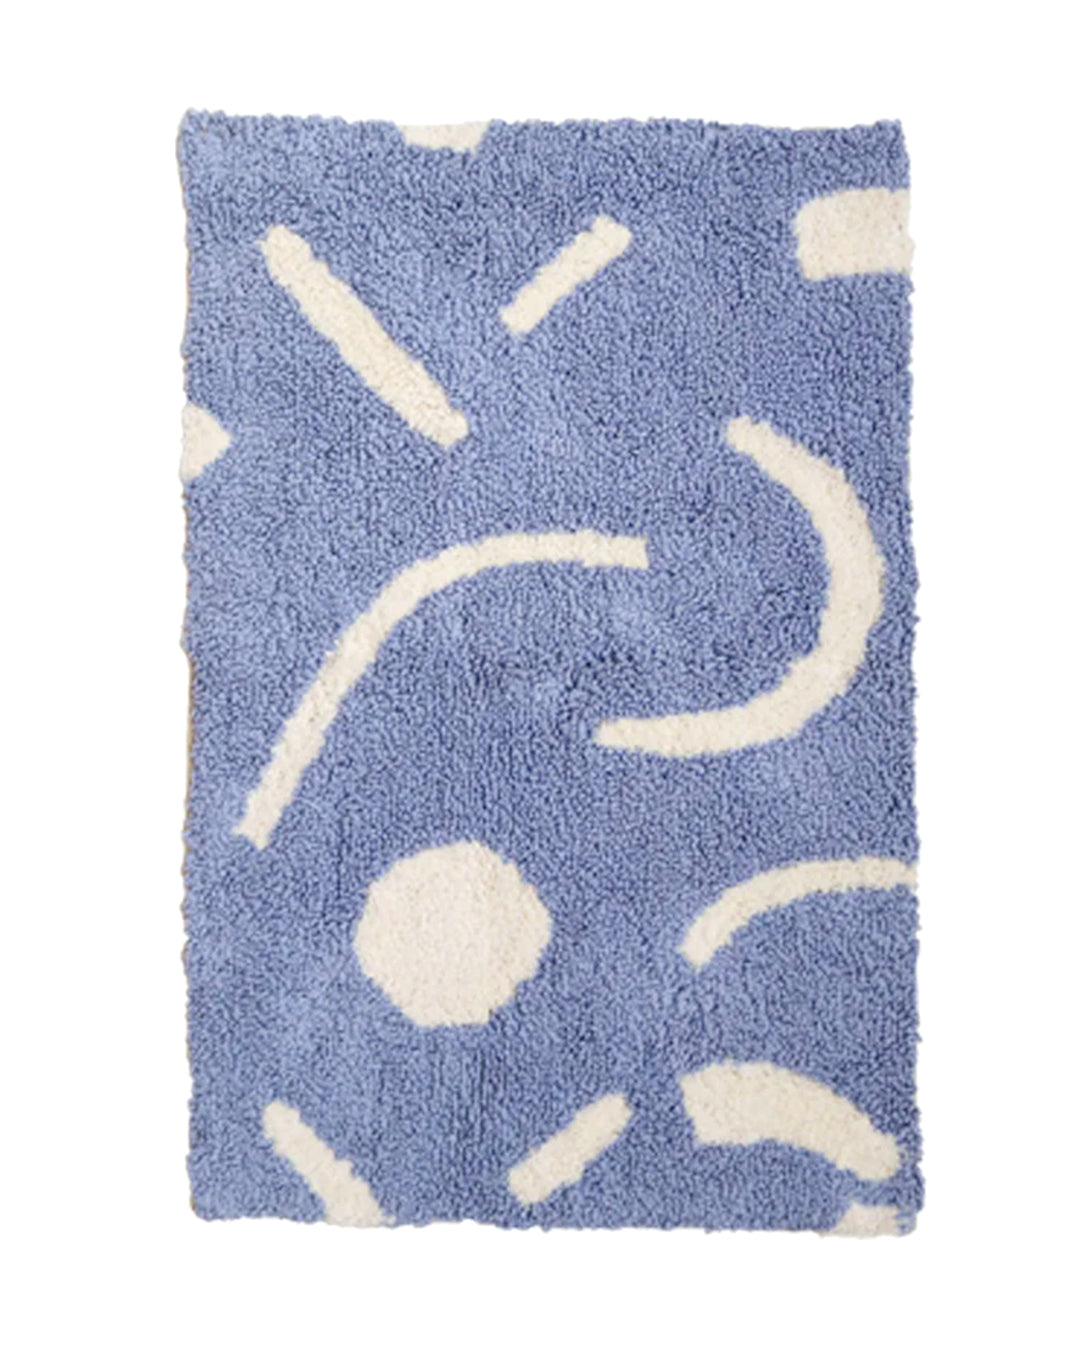 Introducing the Shapes Bath Mat, designed to bring a sense of calm to your kids bath time. This modern, abstract design features in cornflower blue pairs perfectly with our Kids' Shapes towel range.